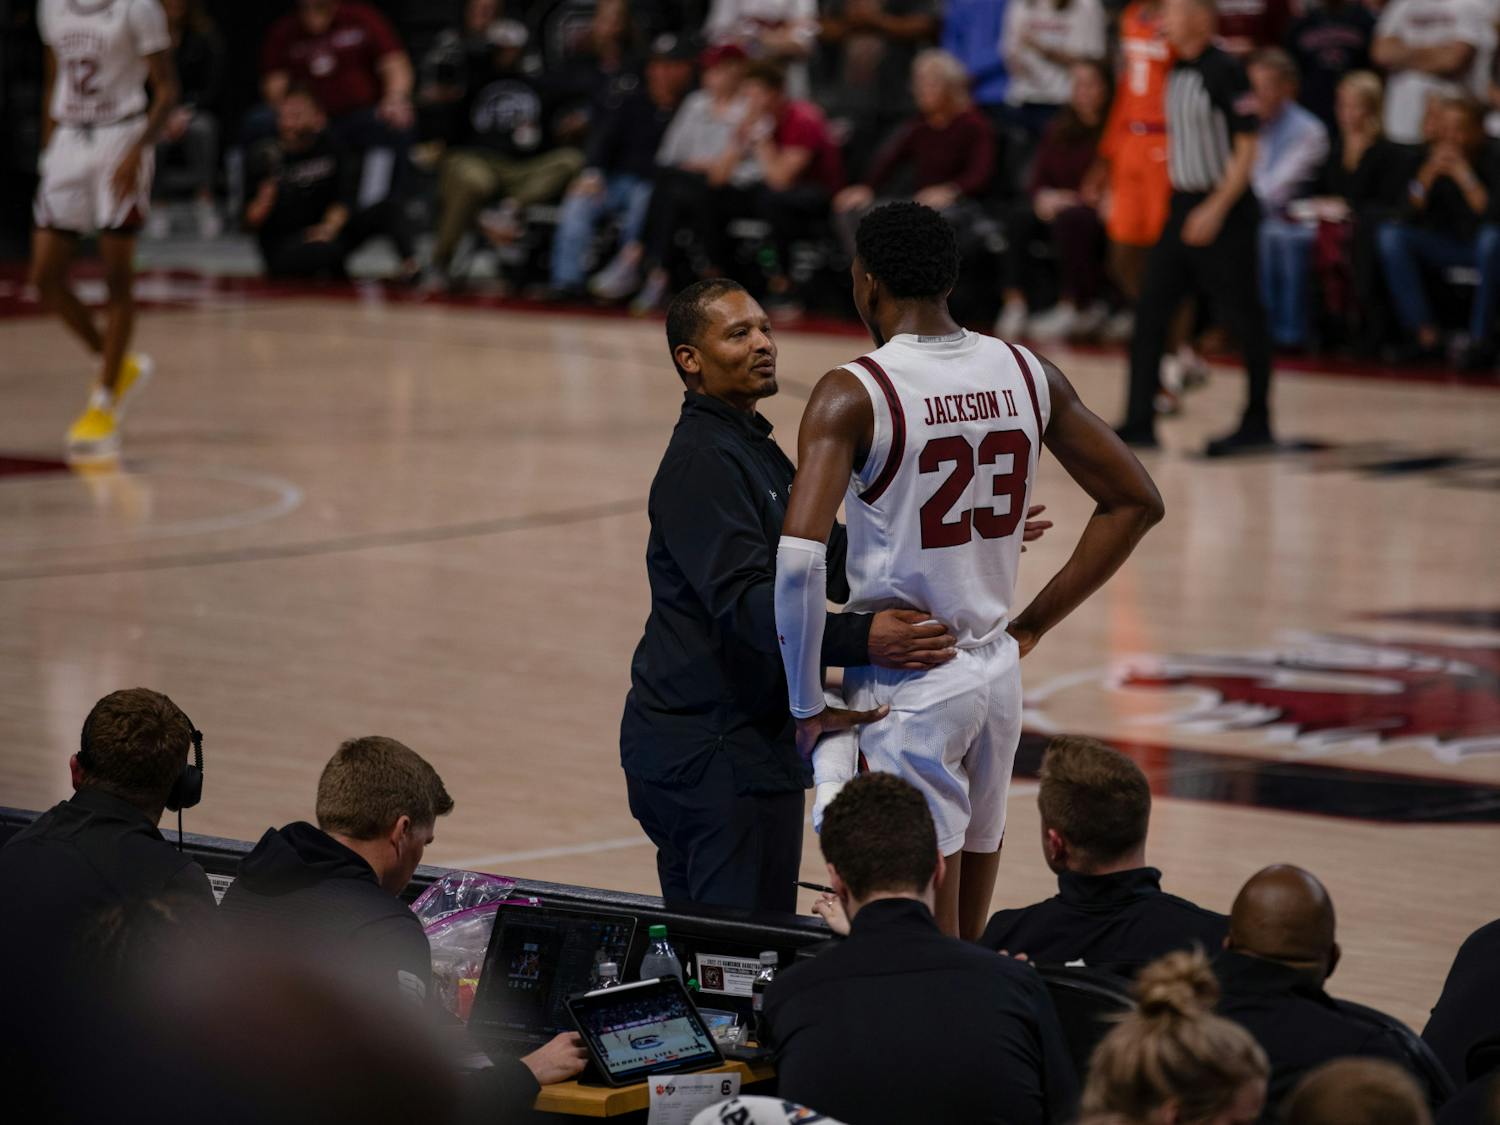 Head coach Lamont Paris and freshman forward GG Jackson talk before he checks back into the game against Clemson on Nov. 11, 2022. Jackson finished the game with 12 points, earning a total of 30 points after two games.